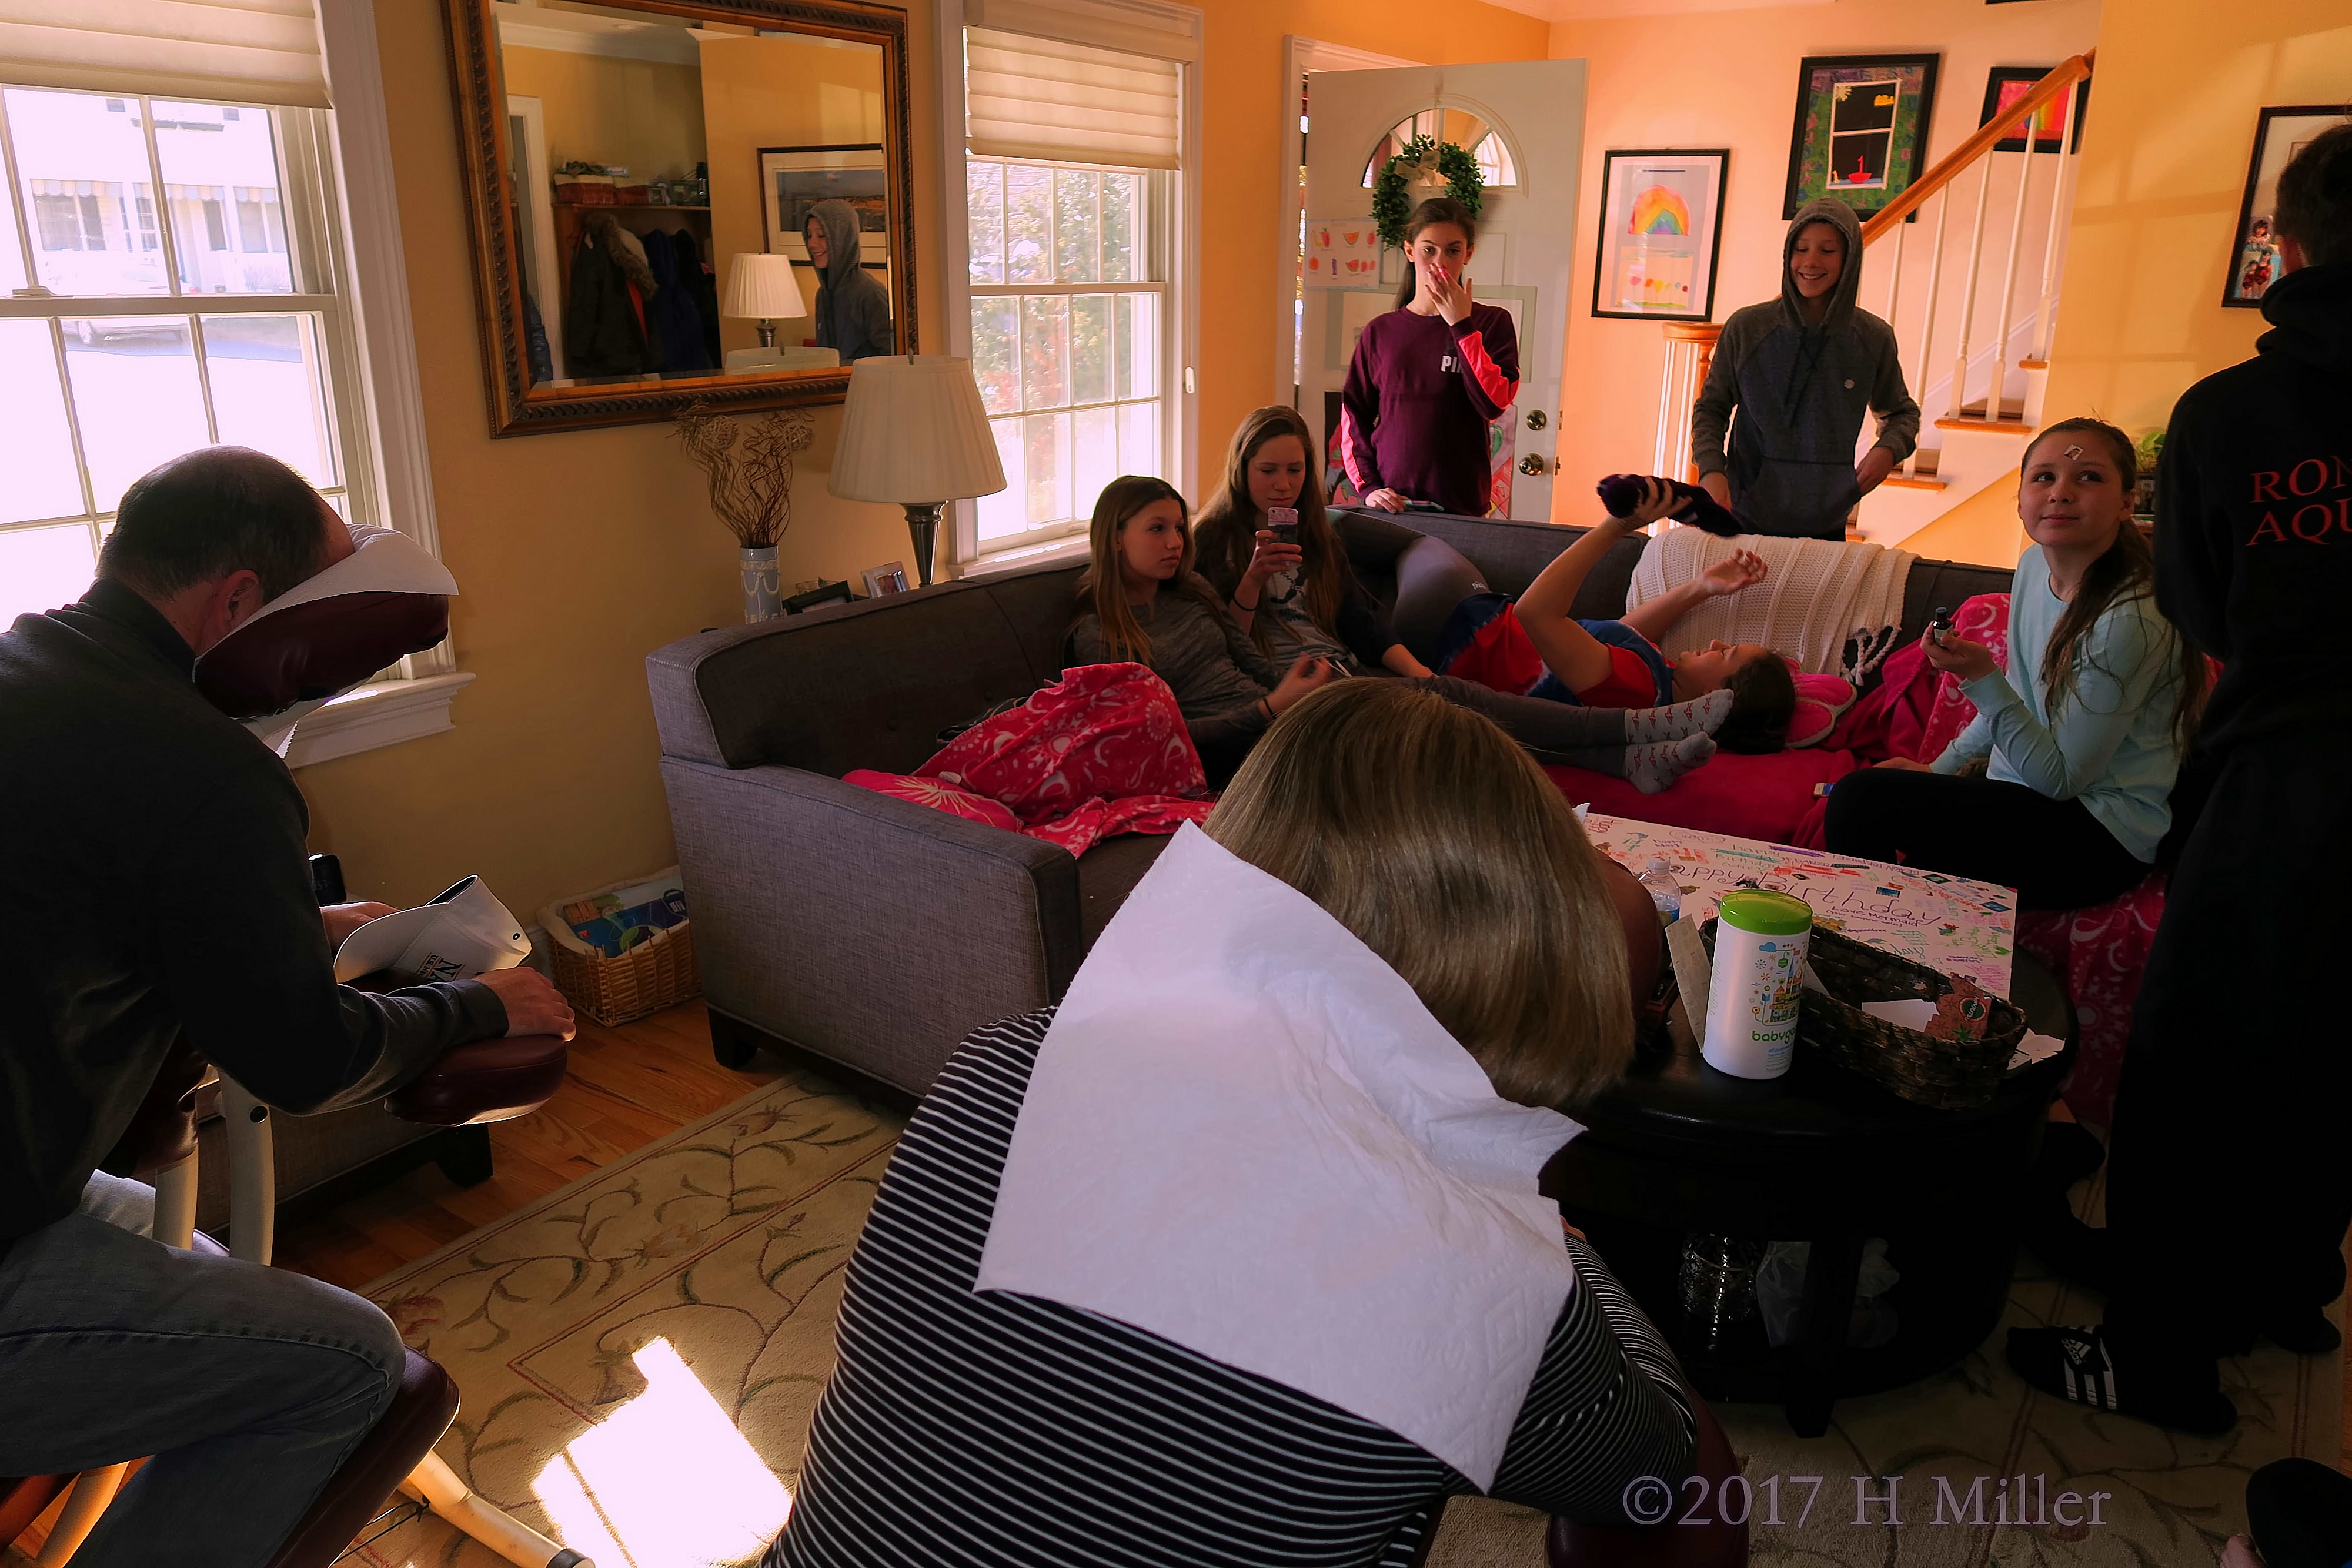 Party Guests Chill On The Couch While Parent Get Chair Massage! 